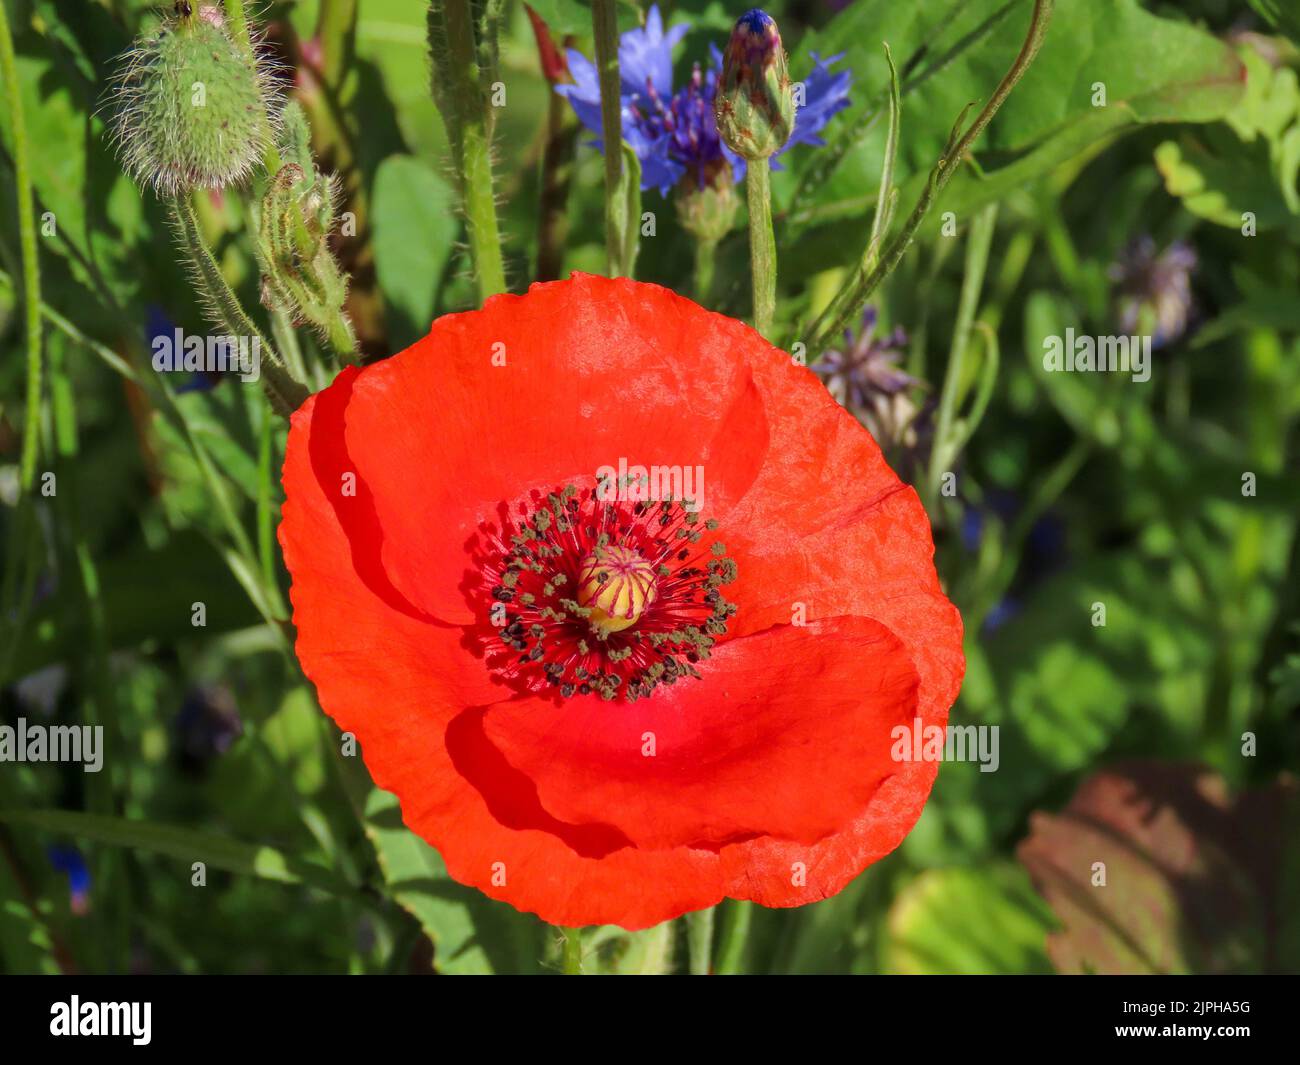 beautiful bright red poppy with vivid blue cornflowers in the background Stock Photo